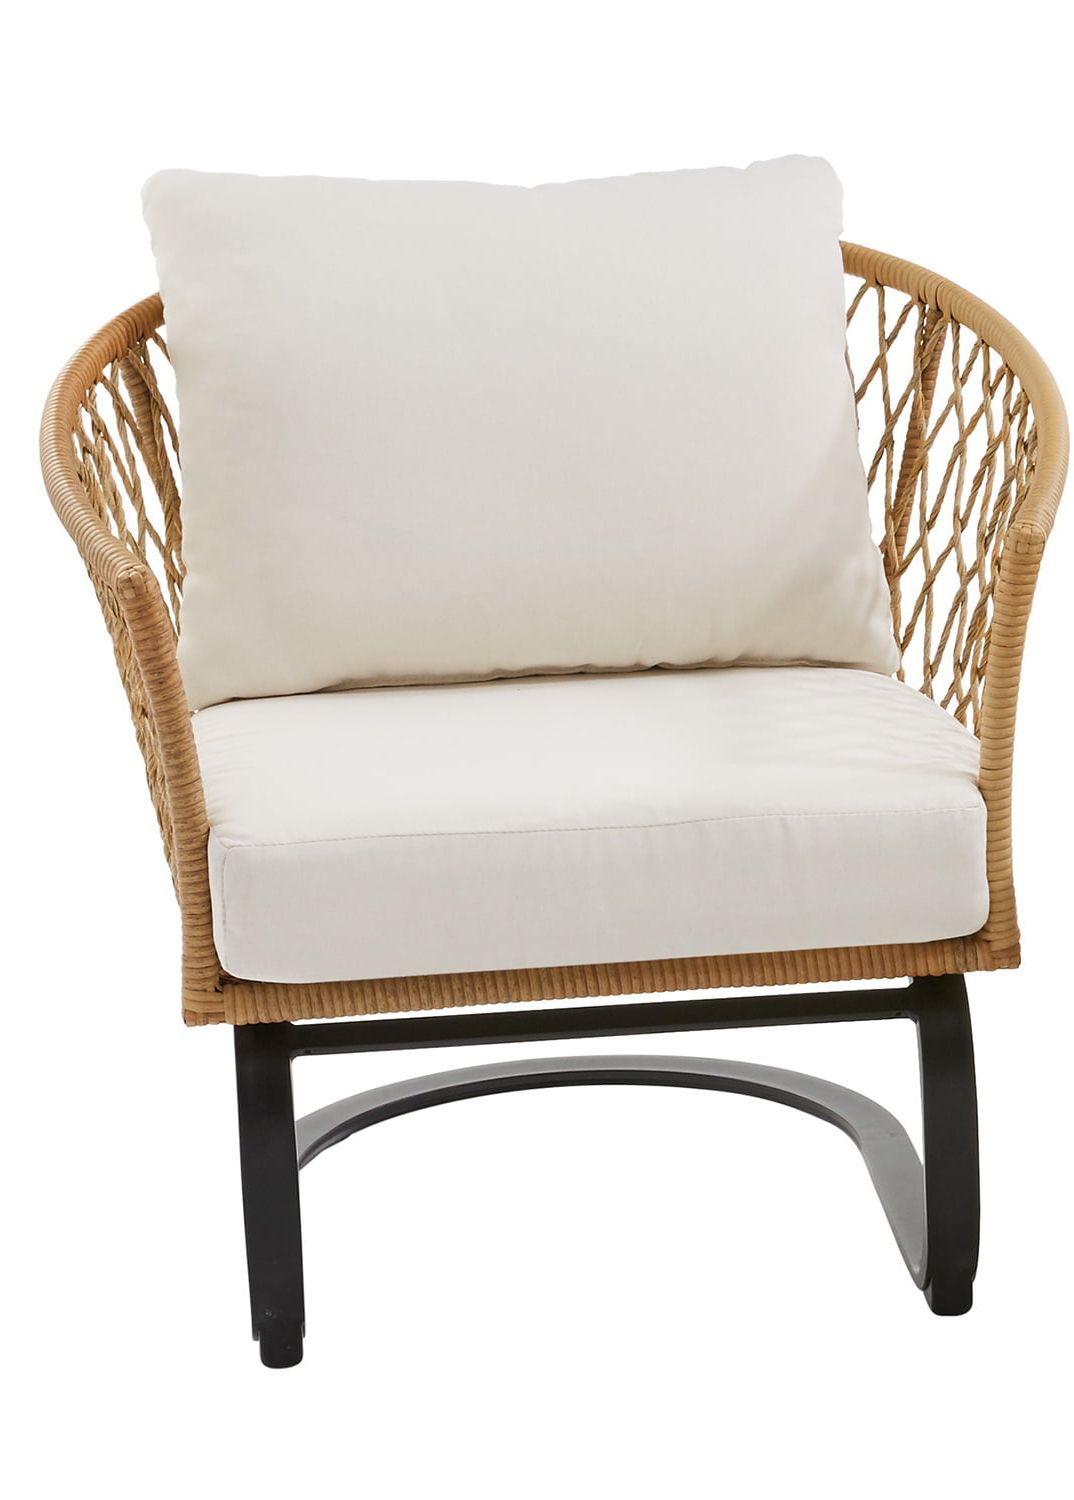 Well Known Better Homes & Gardens Ventura 3 Piece White Outdoor Boho Wicker Chat Set,  Wicker Frame – Walmart Intended For 3 Piece Outdoor Boho Wicker Chat Set (View 2 of 15)